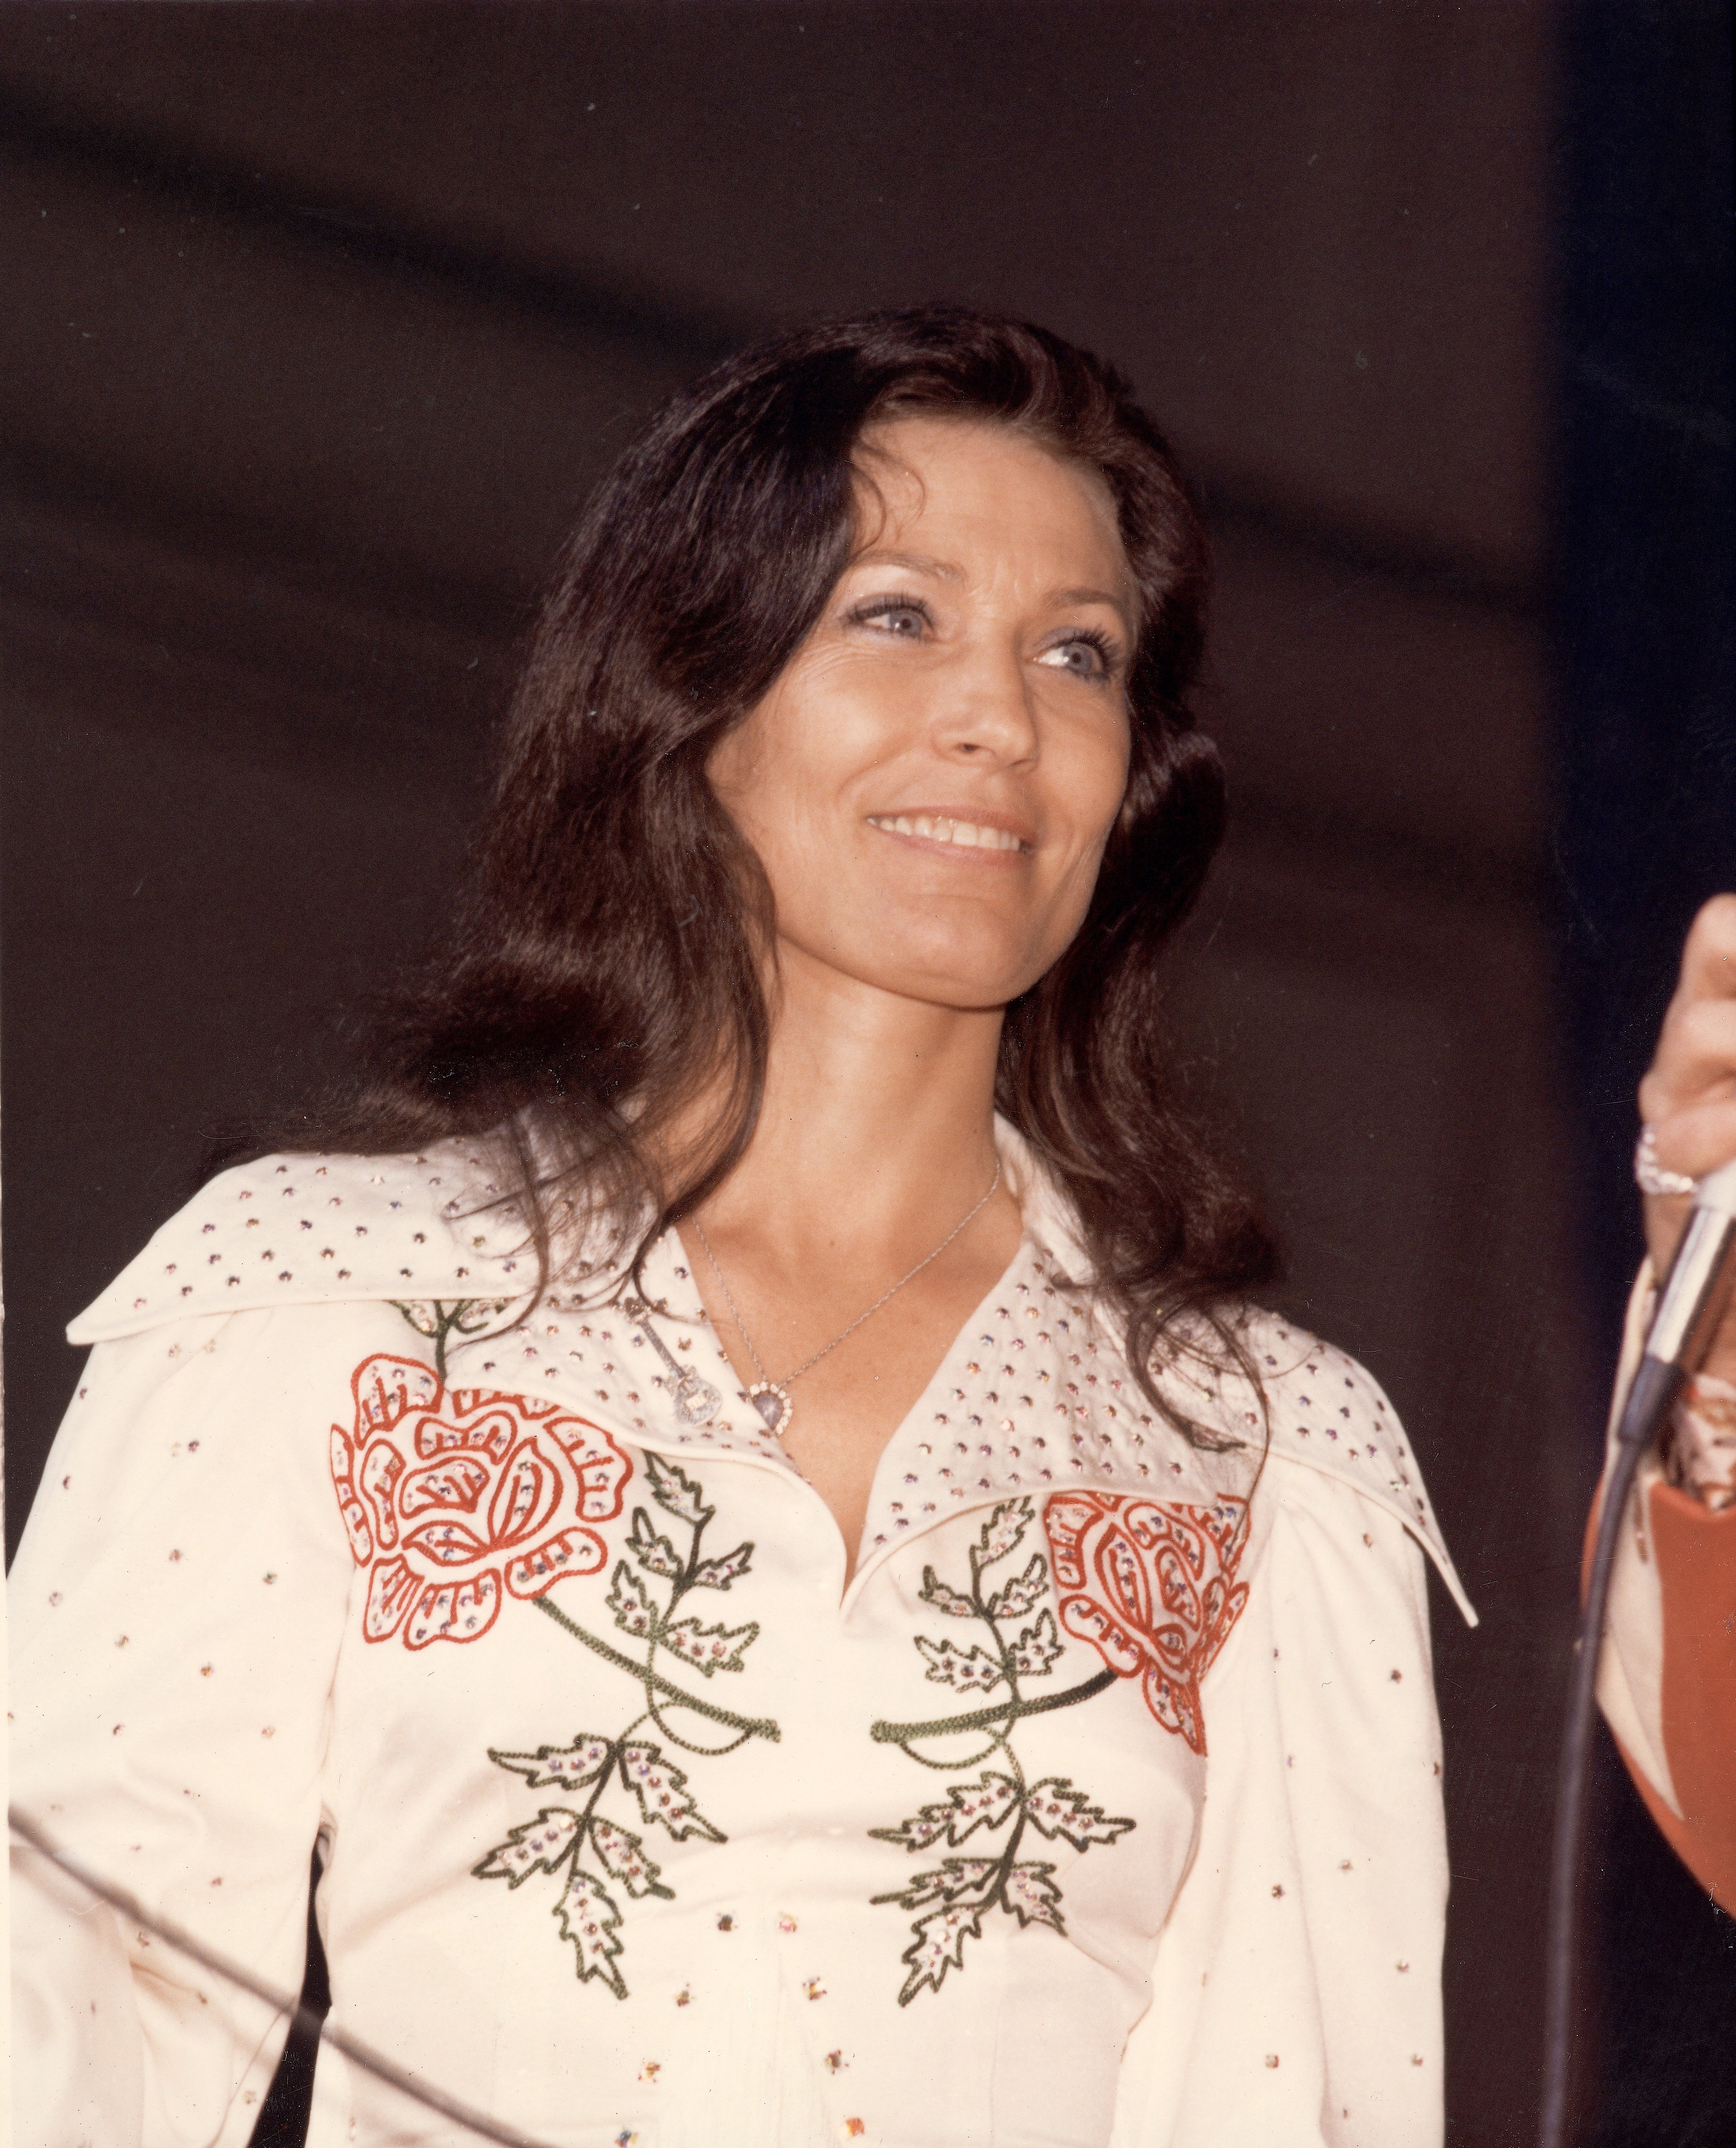 American country music singer and guitarist Loretta Lynn smiles as she looks at an unidentified person off-camera who holds a microphone the late 1970s. | Source: Getty Images